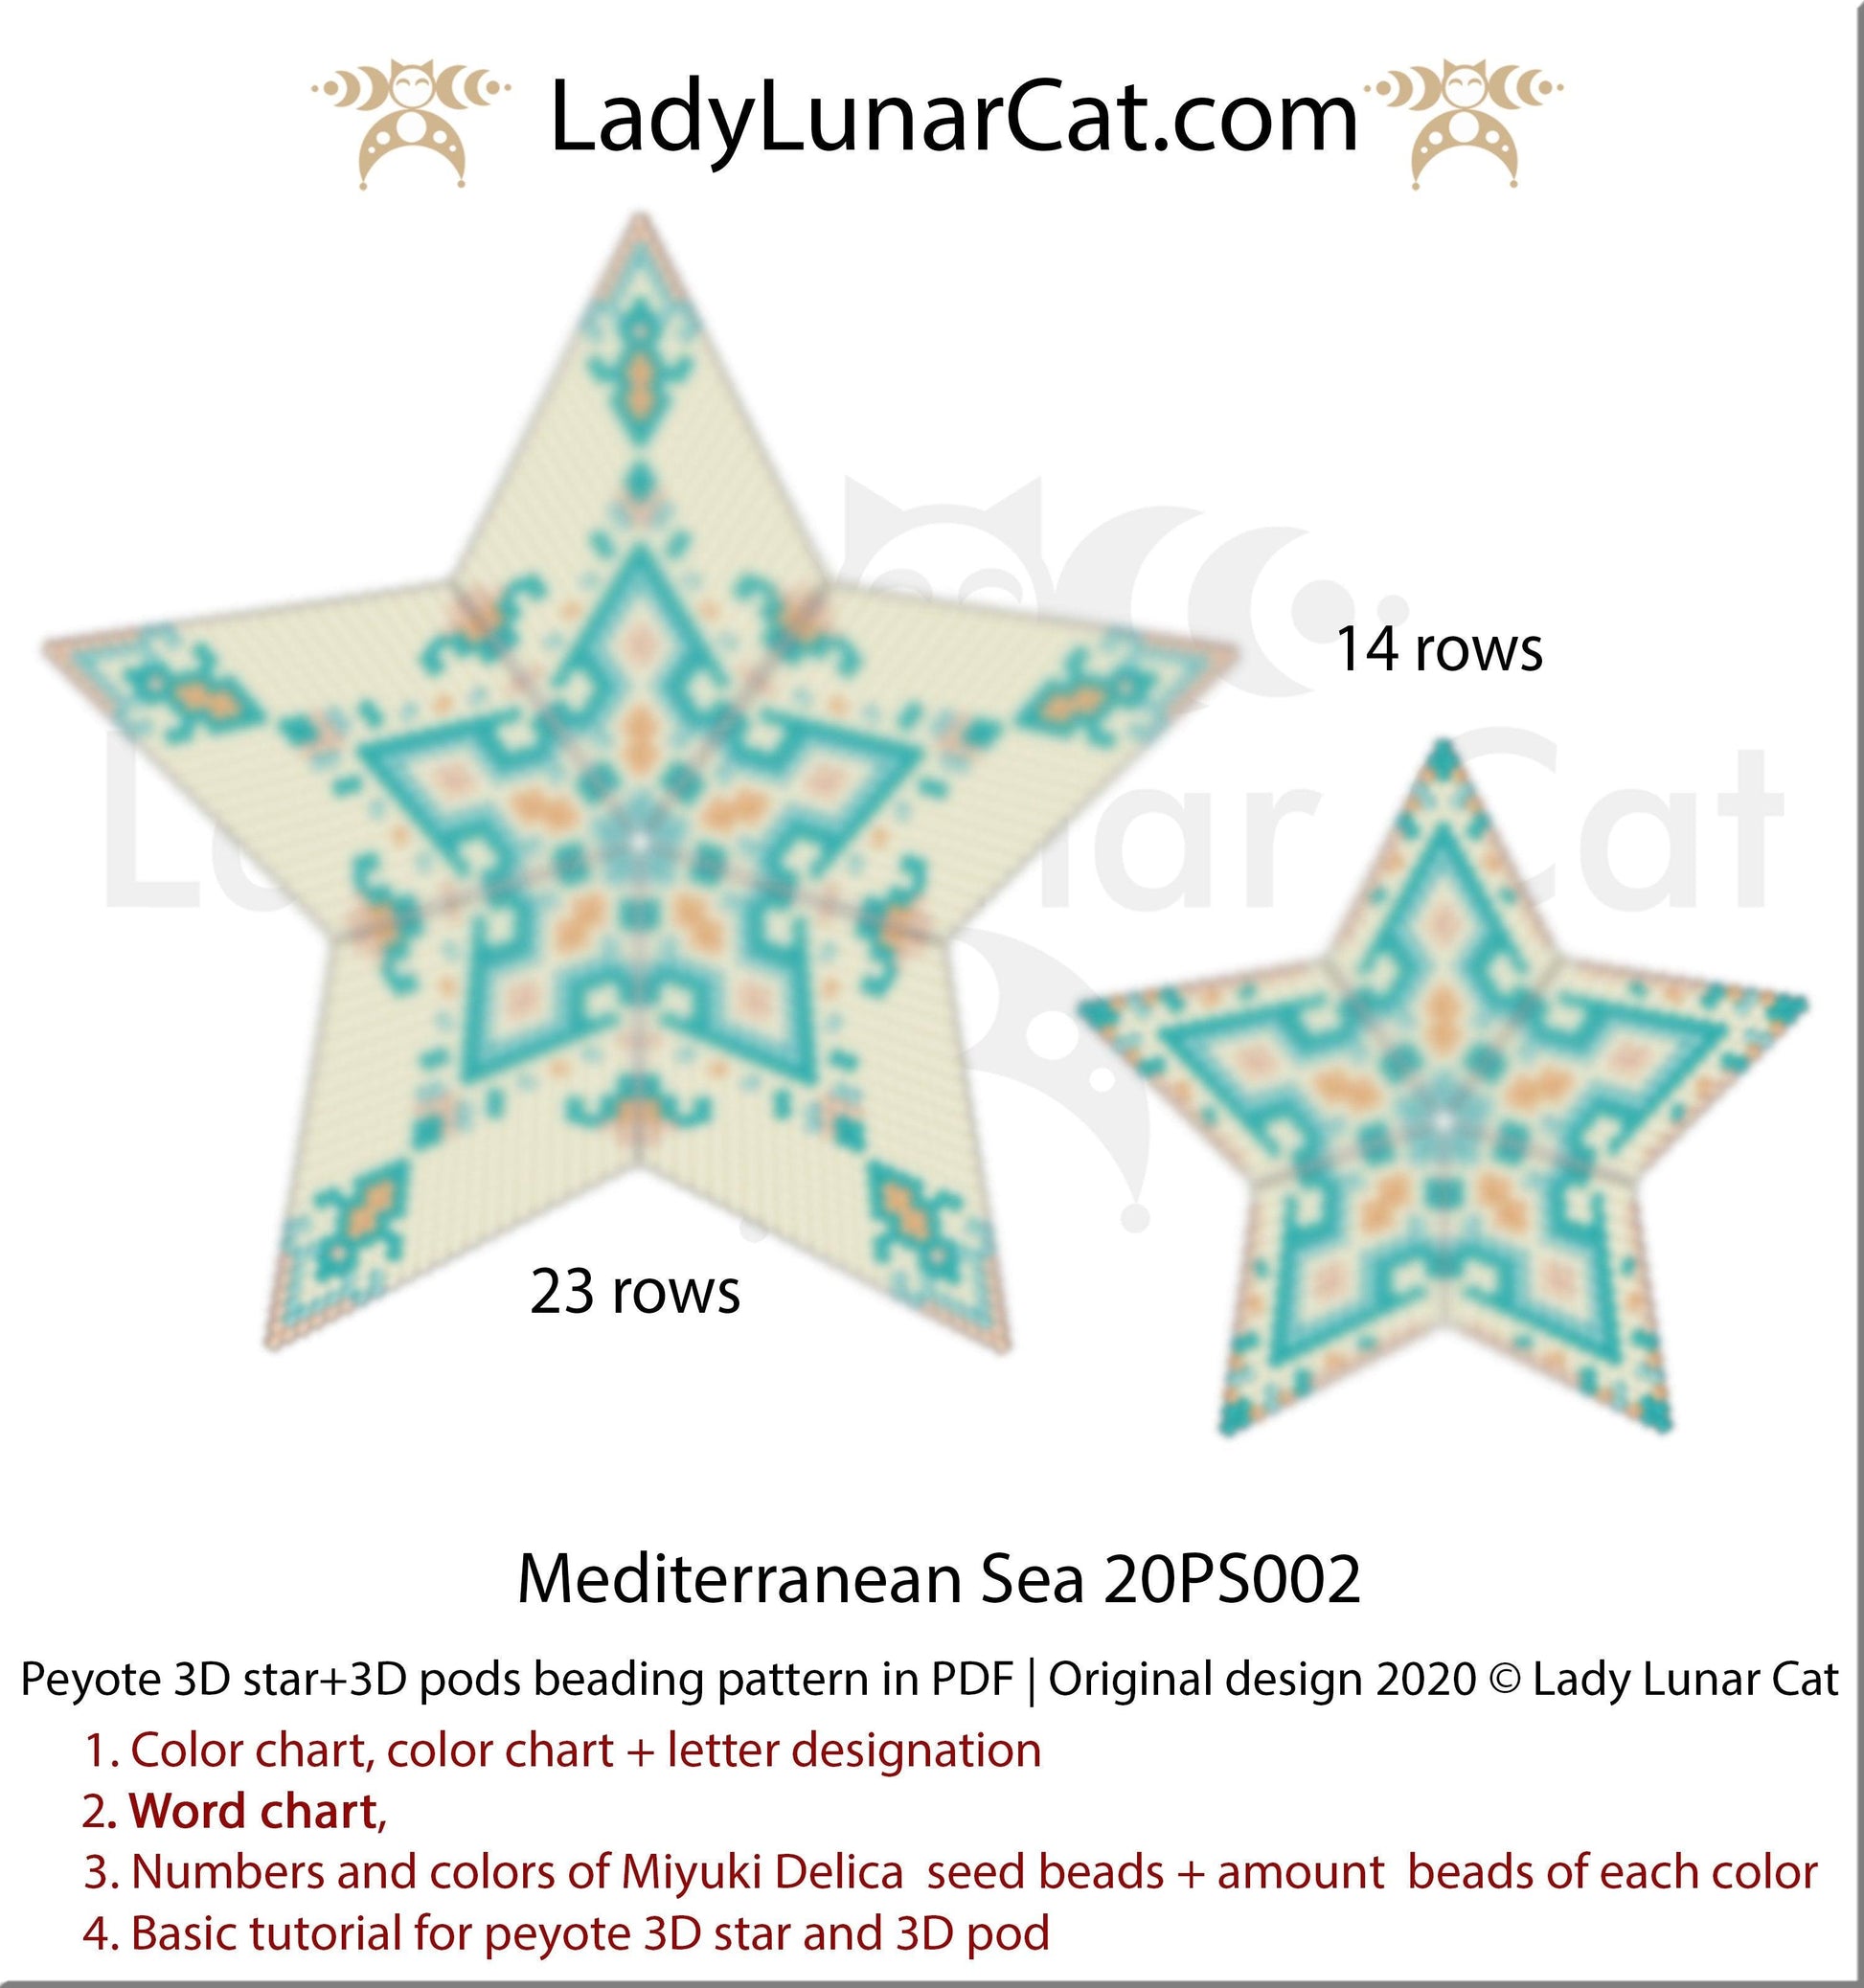 14. The colors of the Mediterranean Sea 